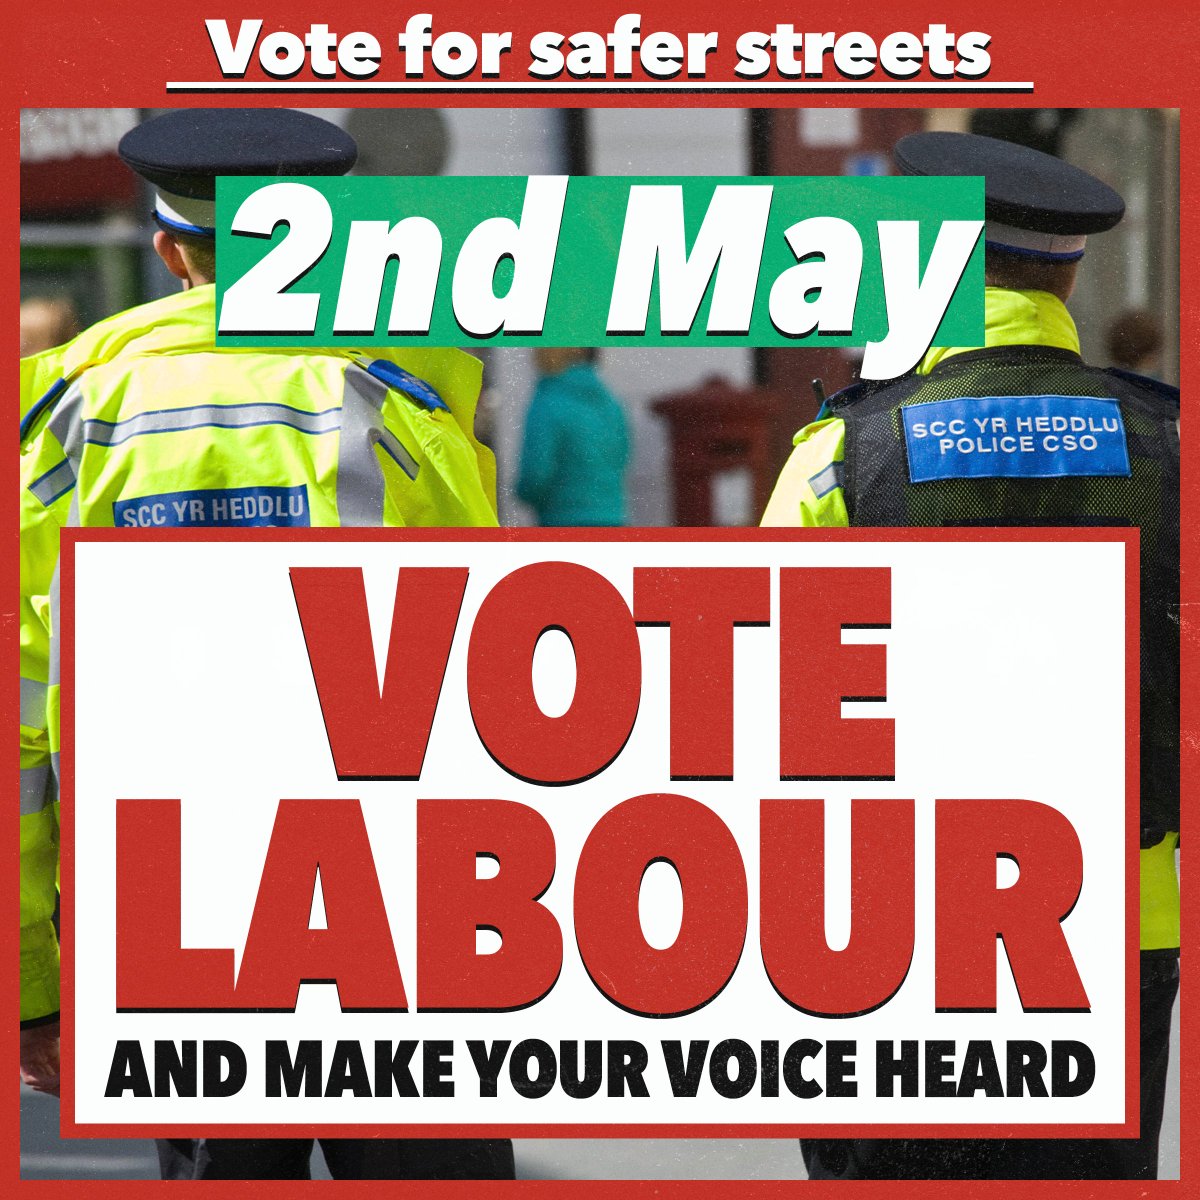 Tomorrow, voters across Wales head to the polls to elect Police and Crime Commissioners. These elections are your chance to vote for safer streets, for all of us. From 7am until 10pm, cast your vote for Welsh Labour.